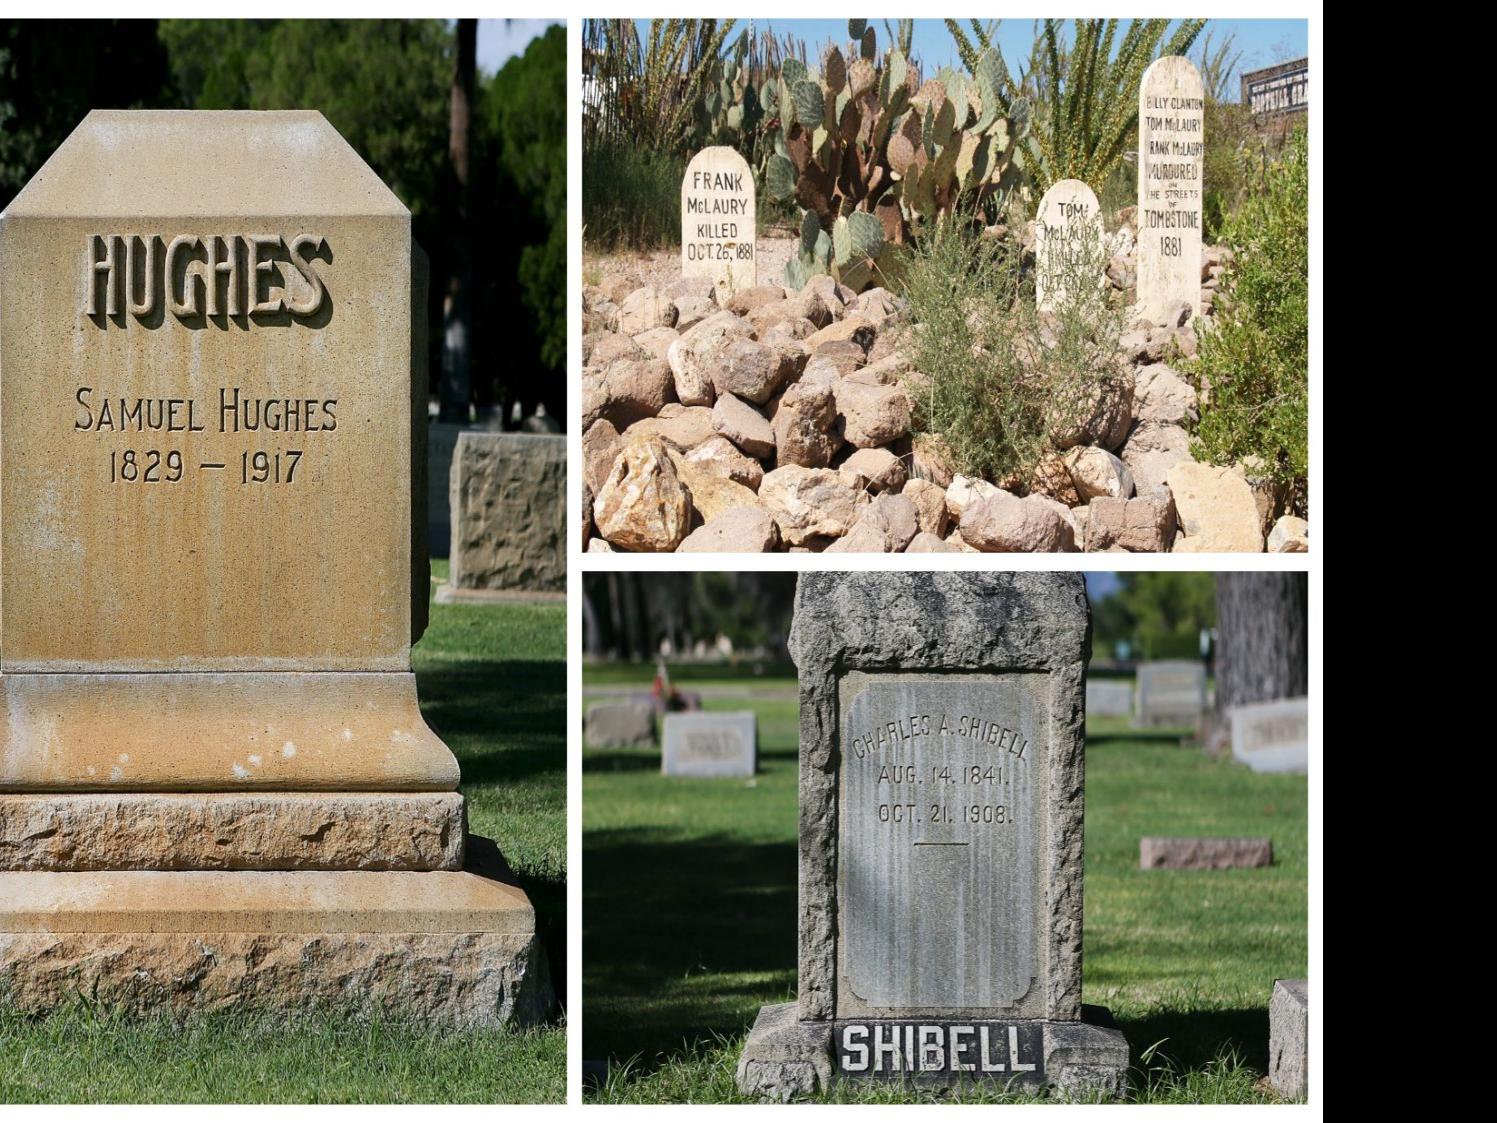 Here S A Look At 34 Famous Arizona Gravestones Tucson History And Stories From The Star S Archives Tucson Com